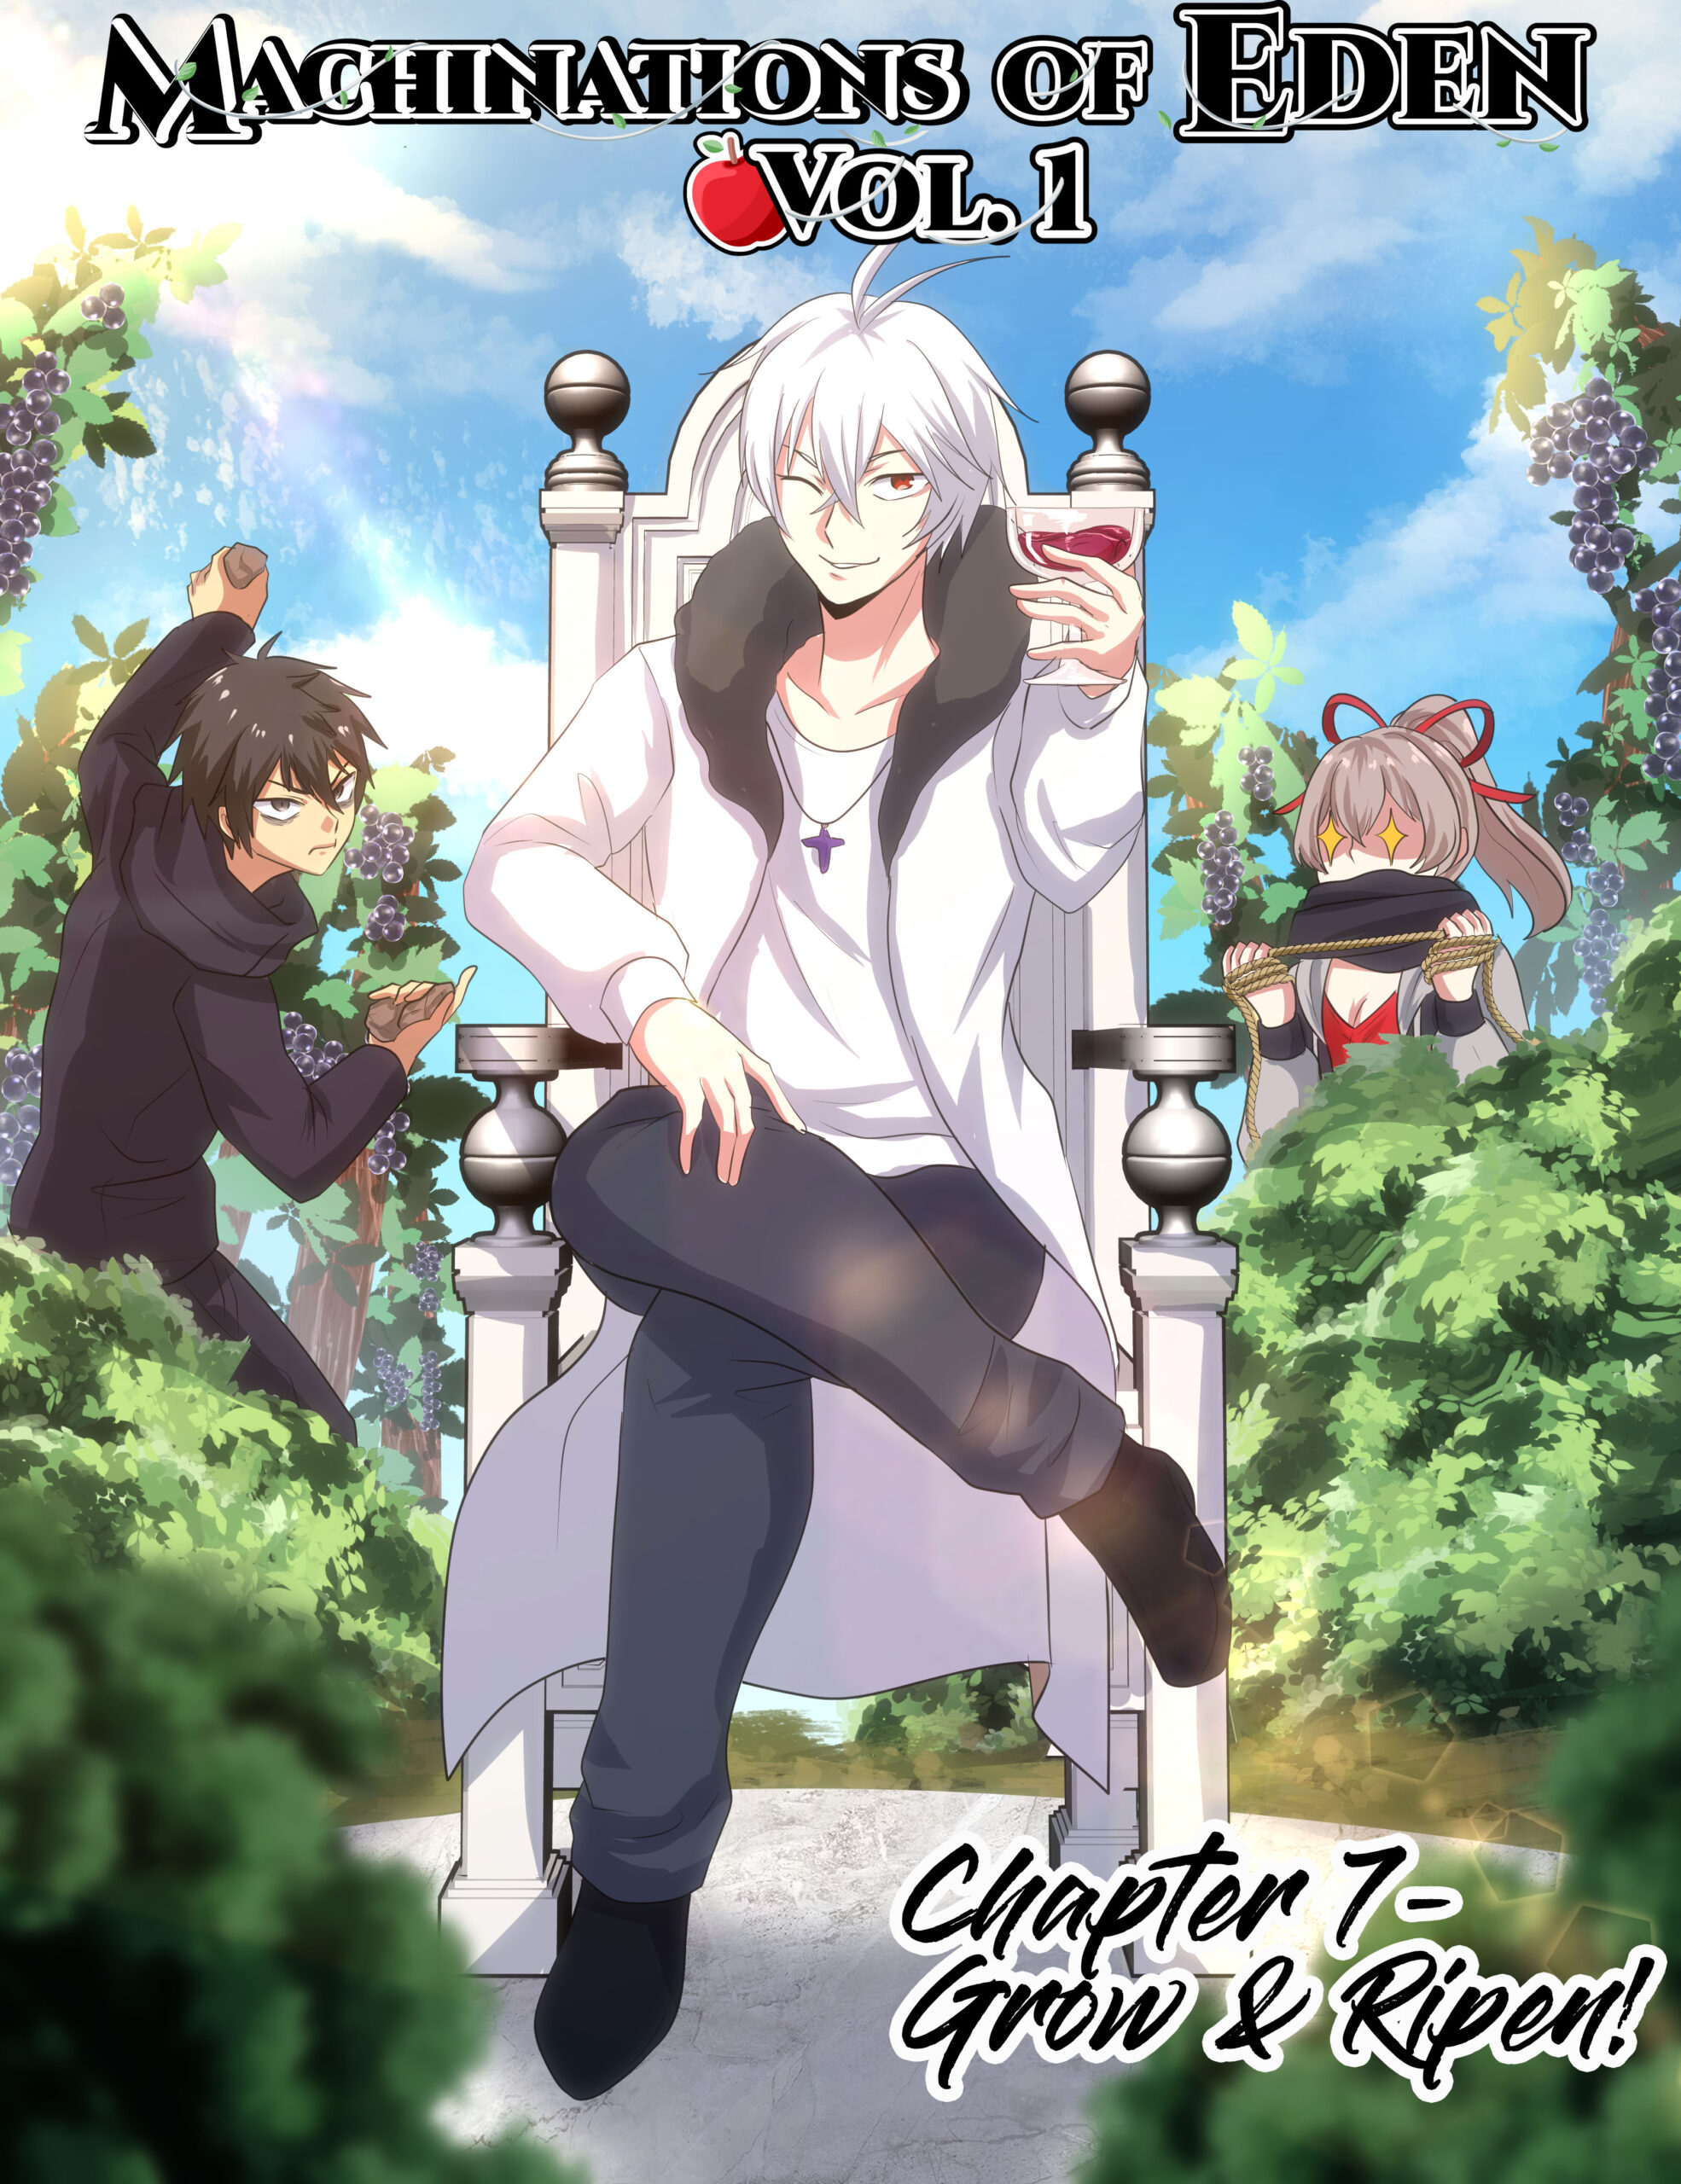 Chapter 7 cover website